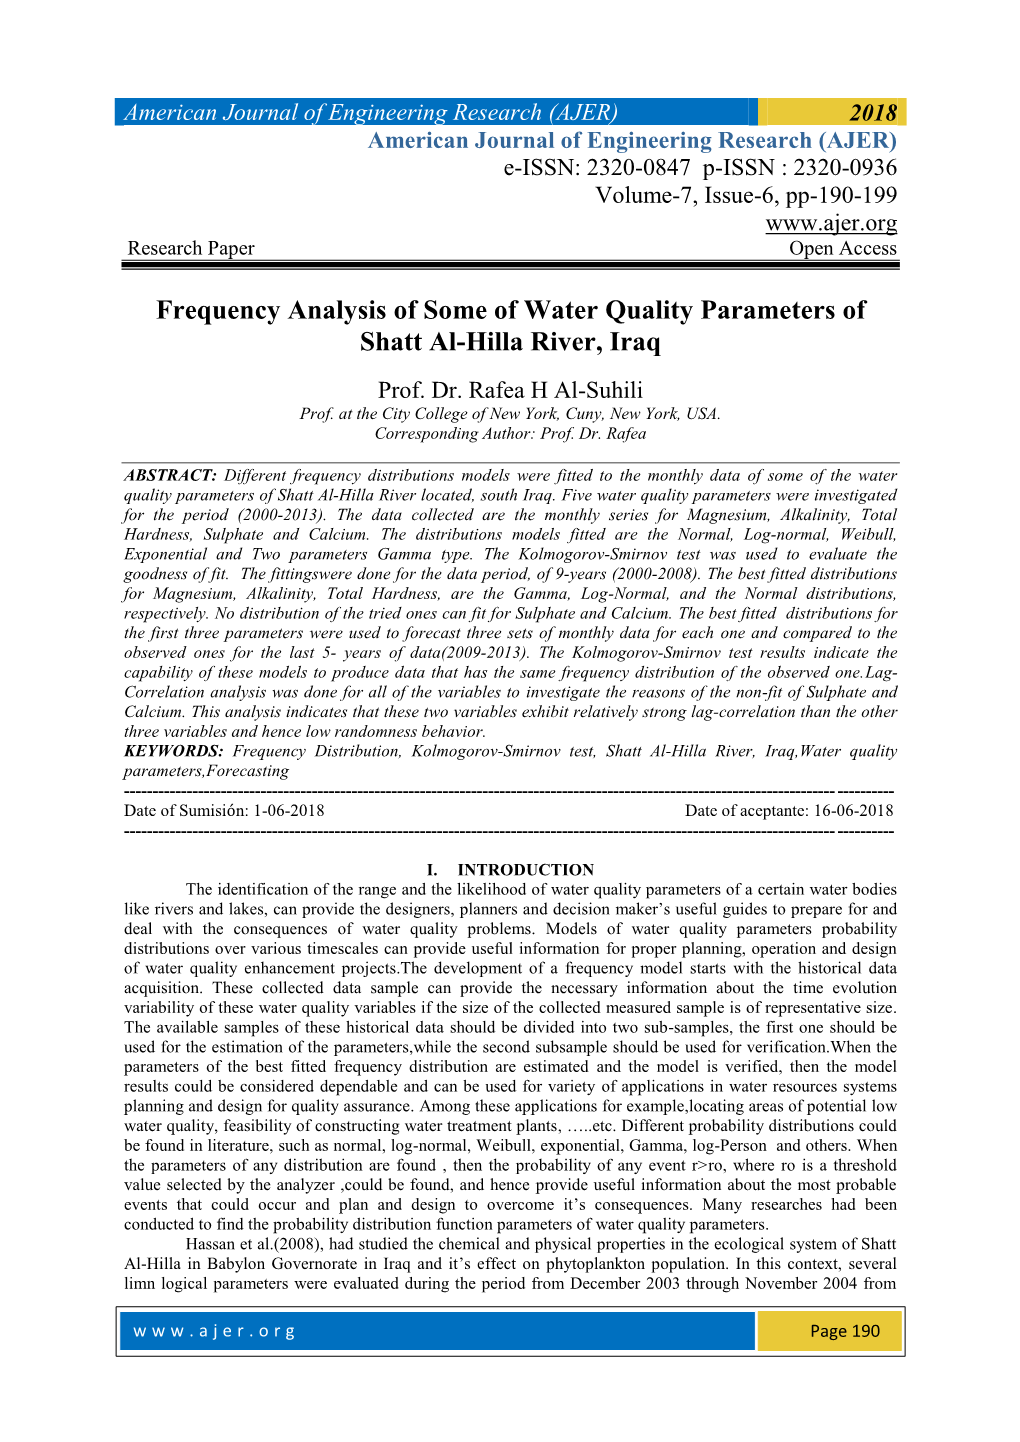 Frequency Analysis of Some of Water Quality Parameters of Shatt Al-Hilla River, Iraq